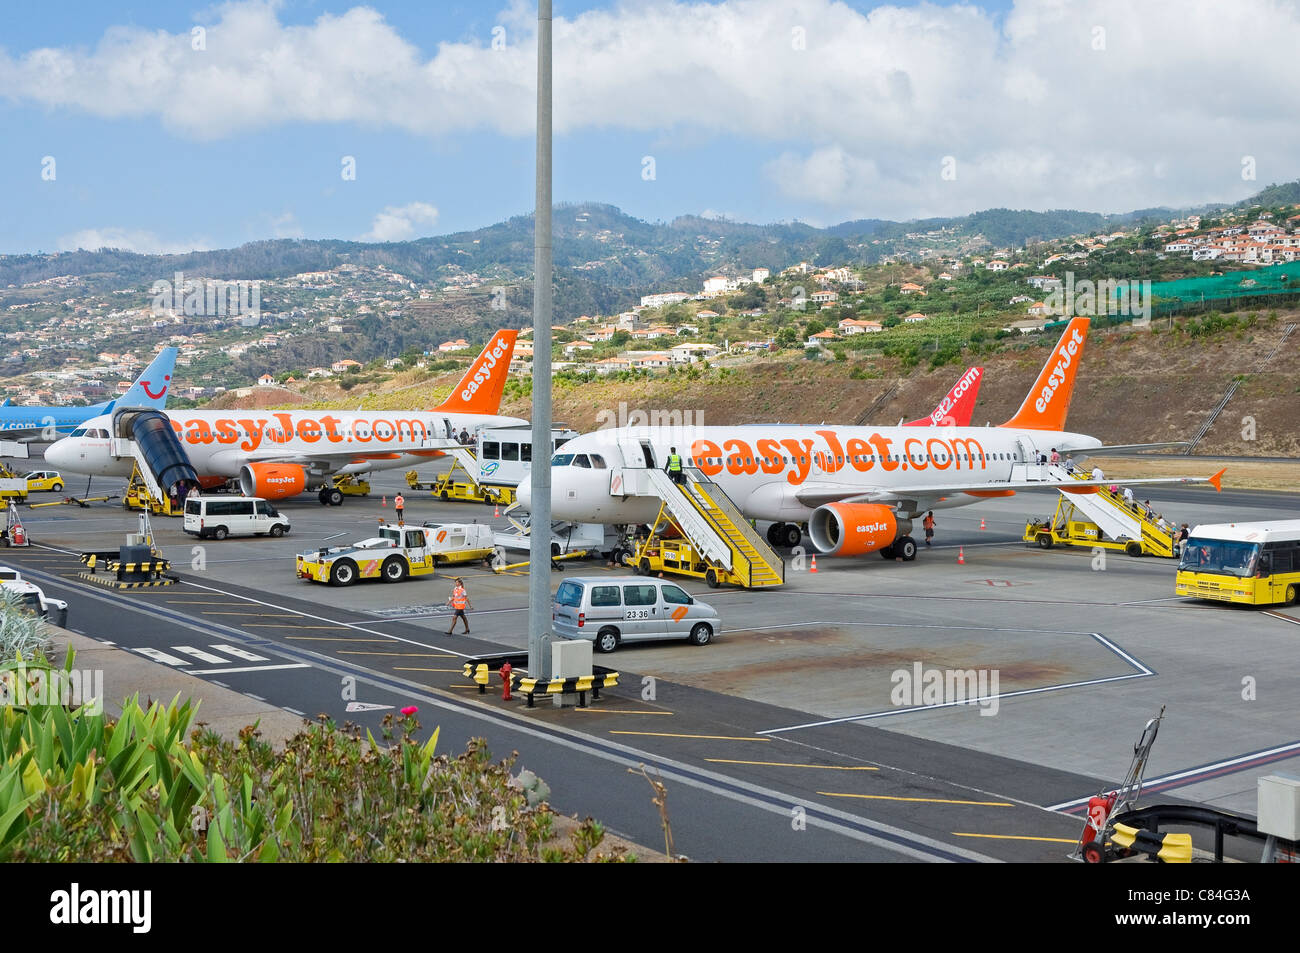 EasyJet planes plane airplane aircraft airplanes parked at Funchal airport Madeira Portugal EU Europe Stock Photo